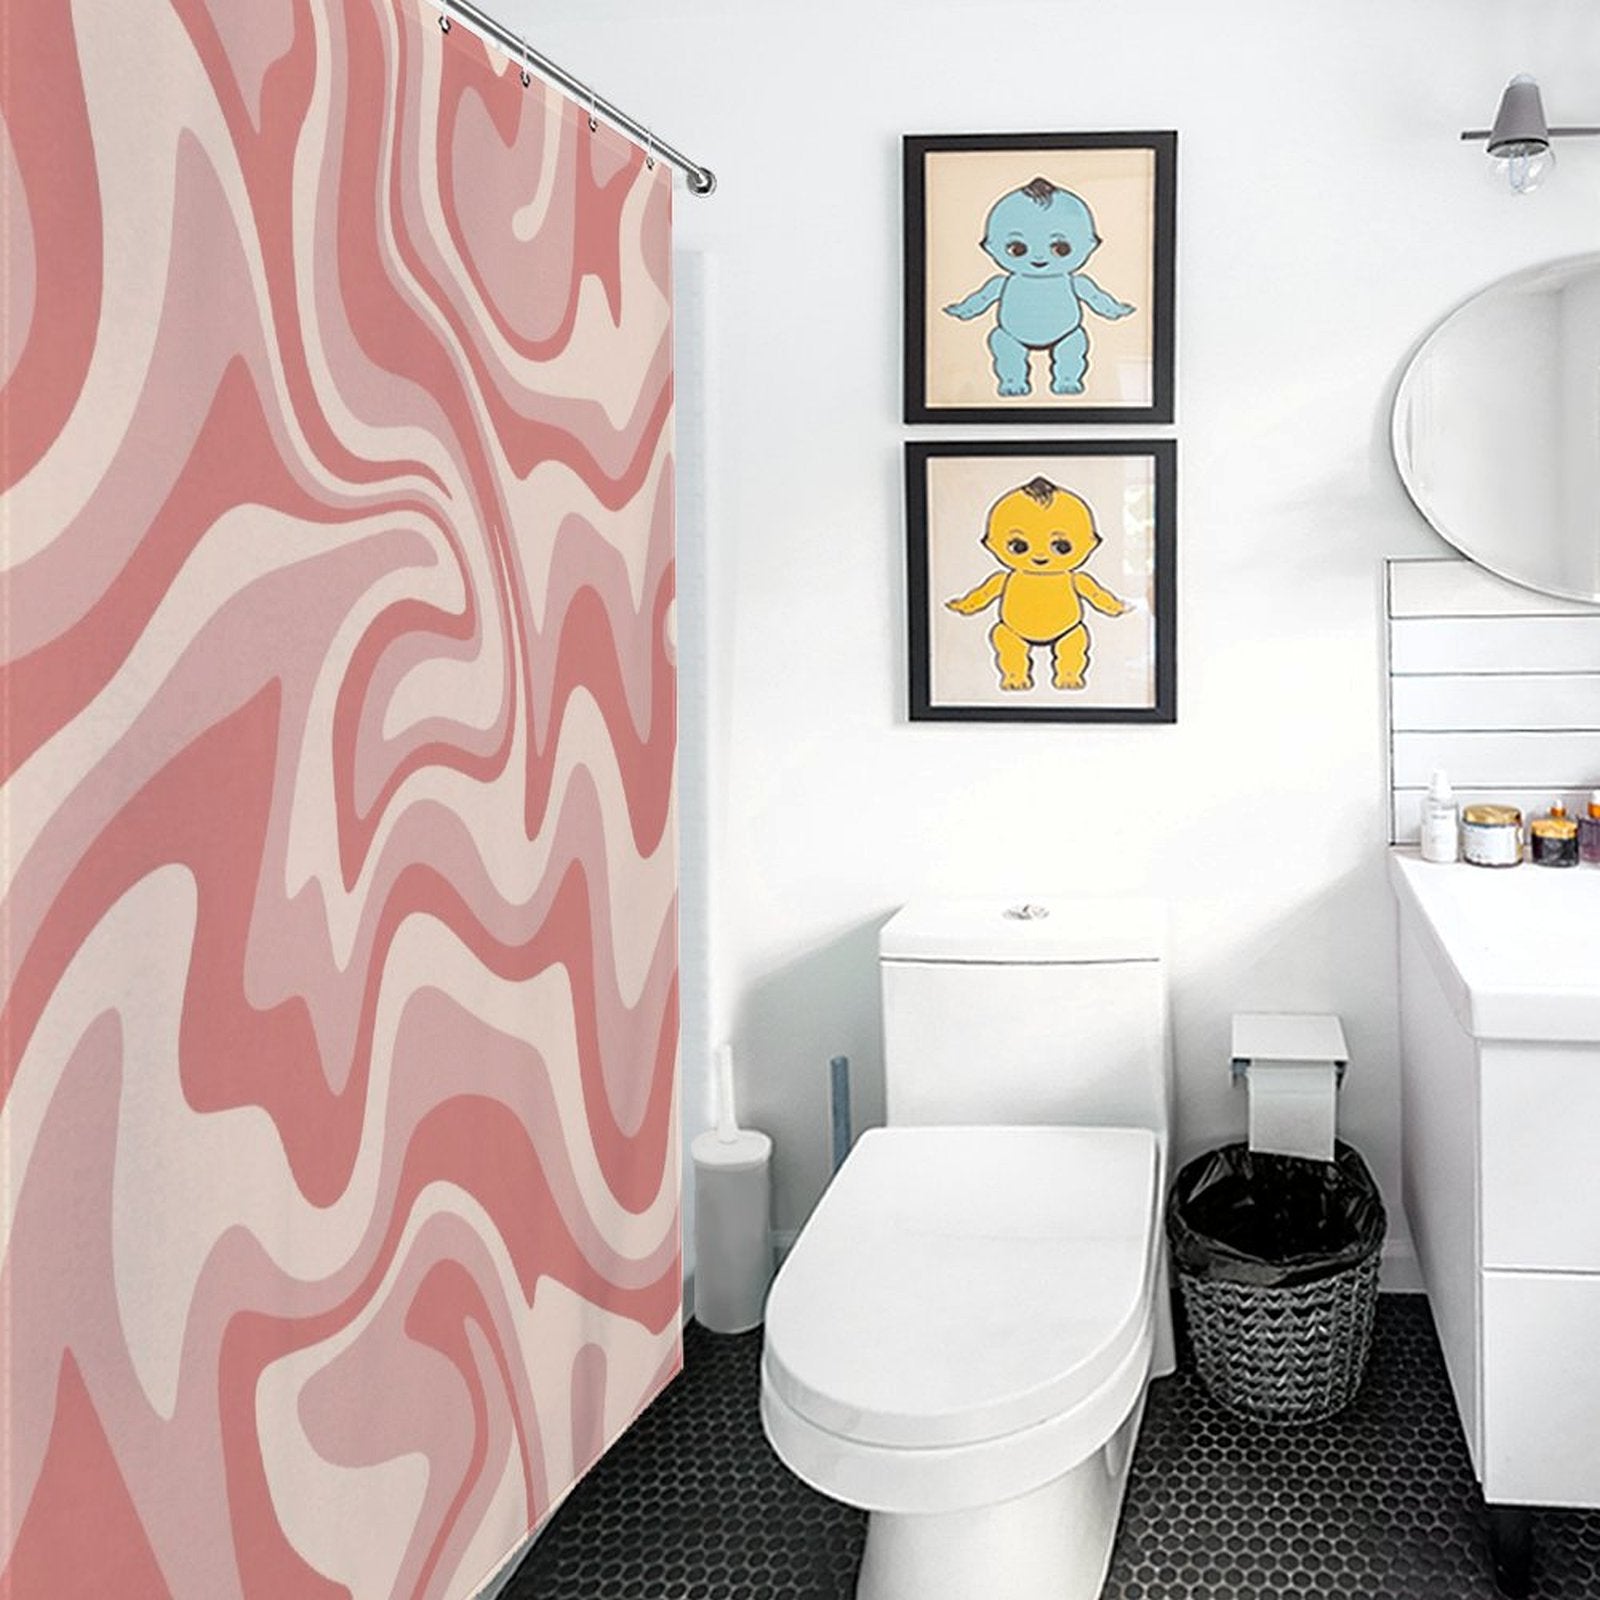 Bathroom with a **Cotton Cat Vintage Modern Wave 70s Cute Wavy Swirl Retro Pink Abstract Shower Curtain-Cottoncat**, a toilet, a round mirror above a sink, and two framed pictures of cartoon characters on the wall.